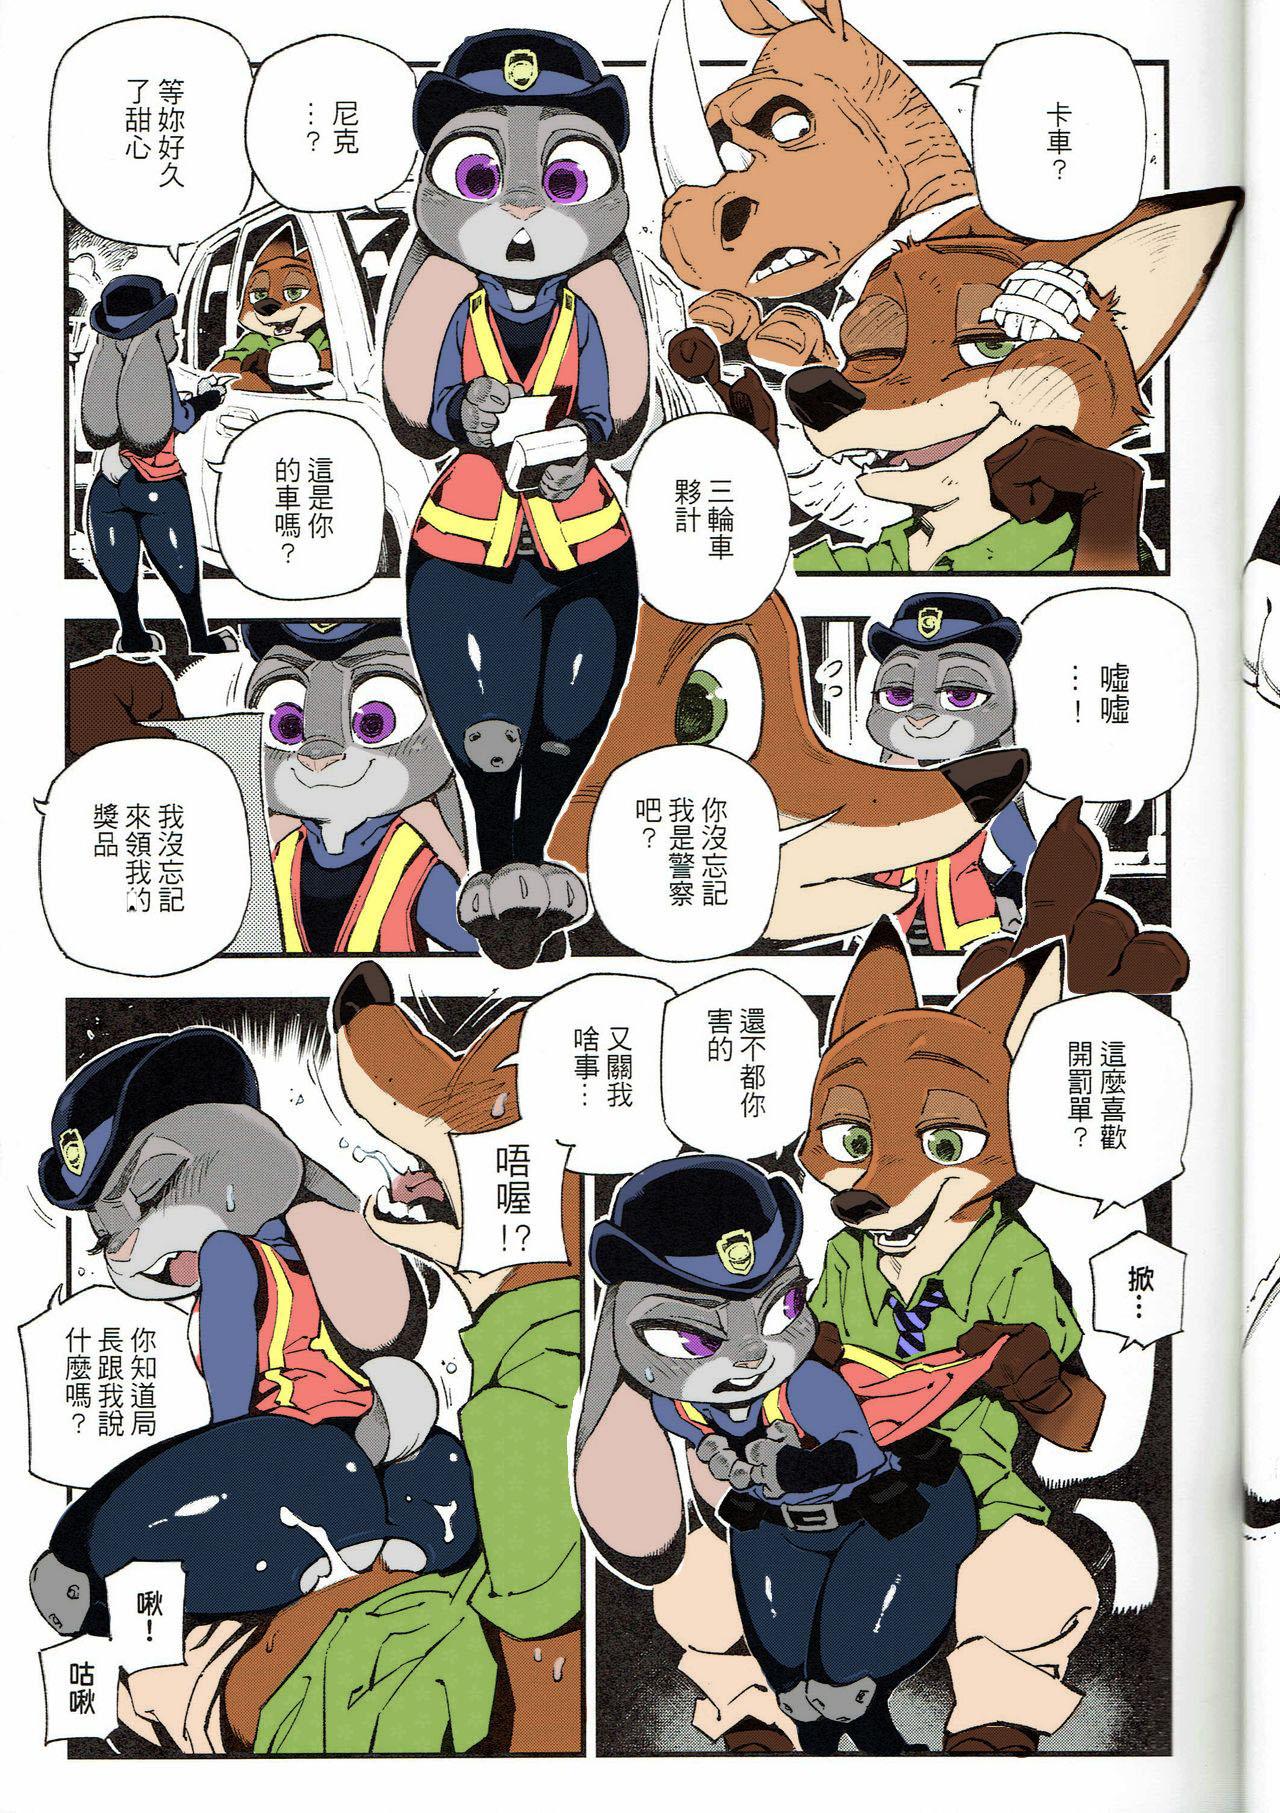 Jockstrap What Does The Fox Say? - Zootopia Athletic - Page 11